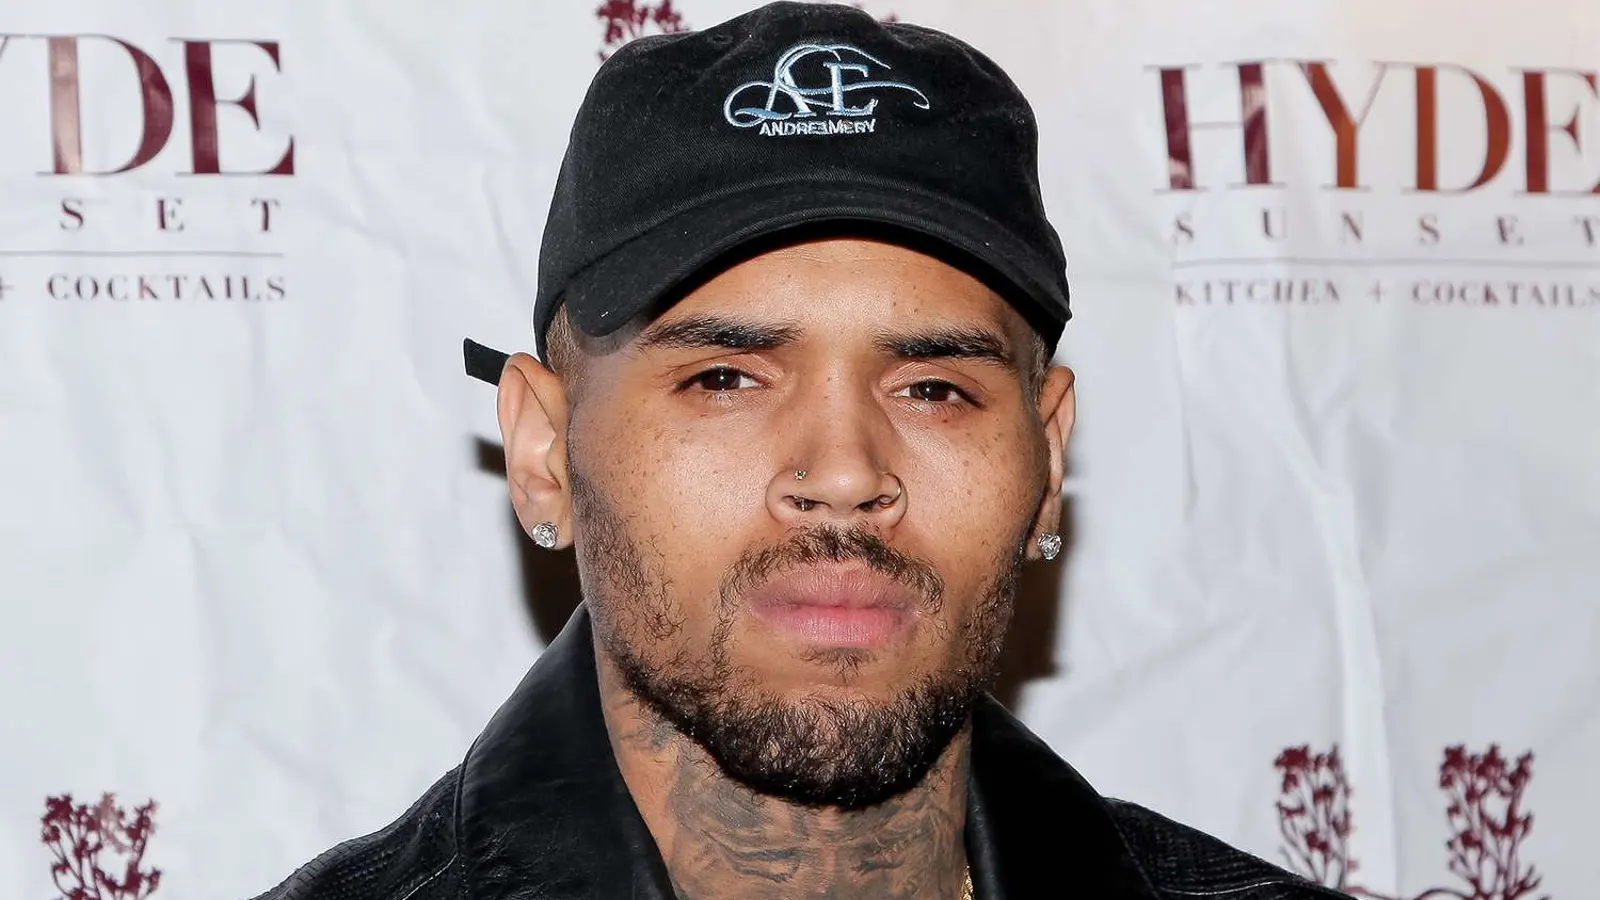 Rapper Chris Brown was snubbed at the 2022 American Music Awards